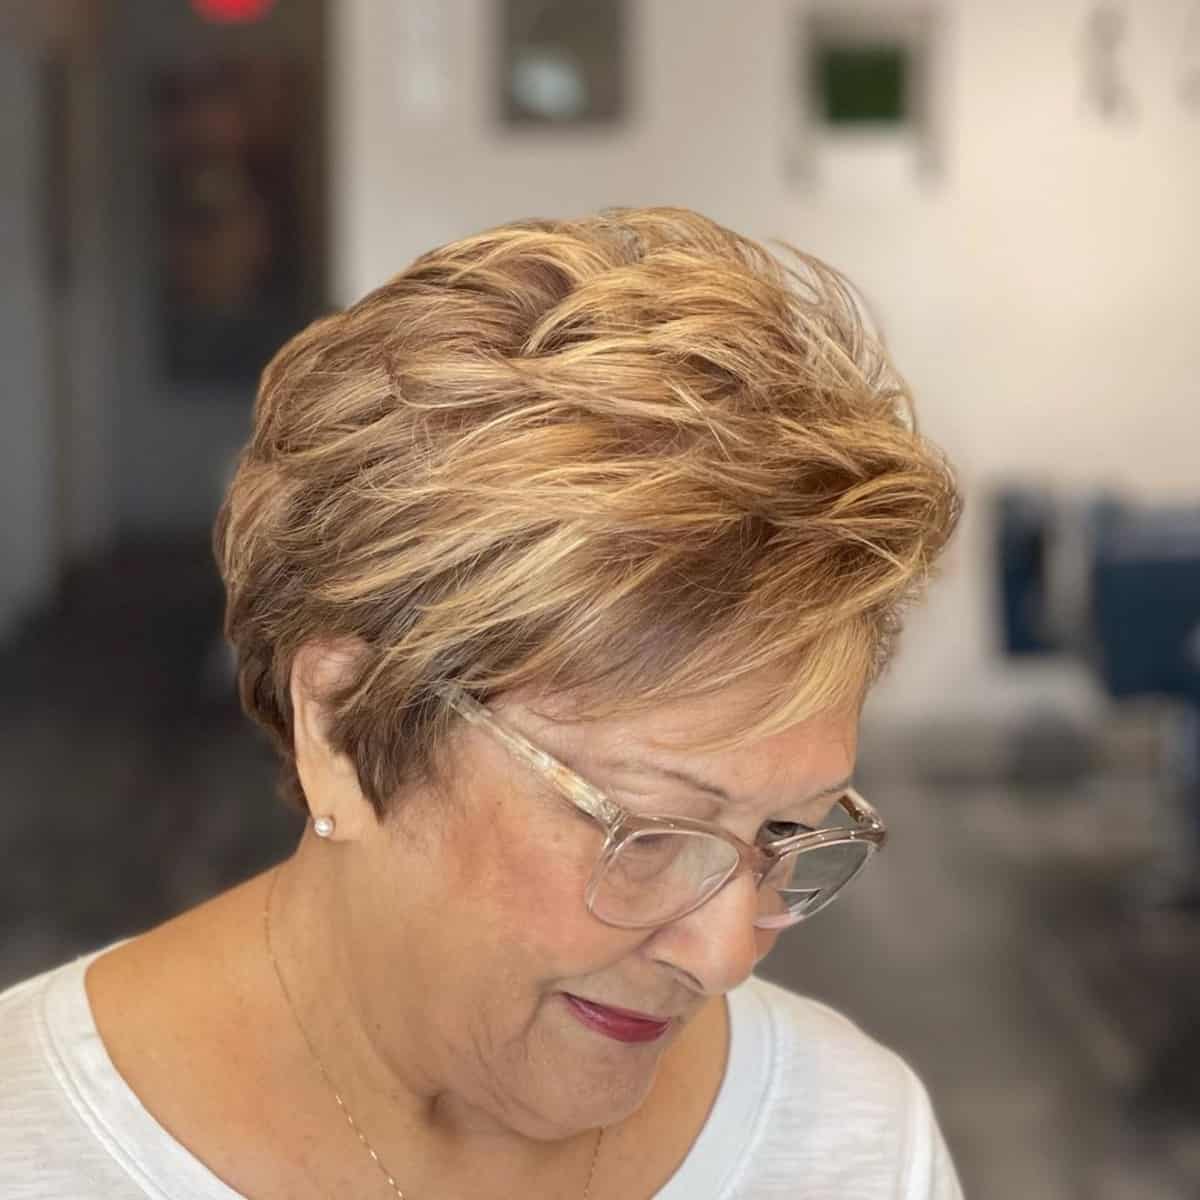 Layered Cut for 60 year old with Natural Grey Hair